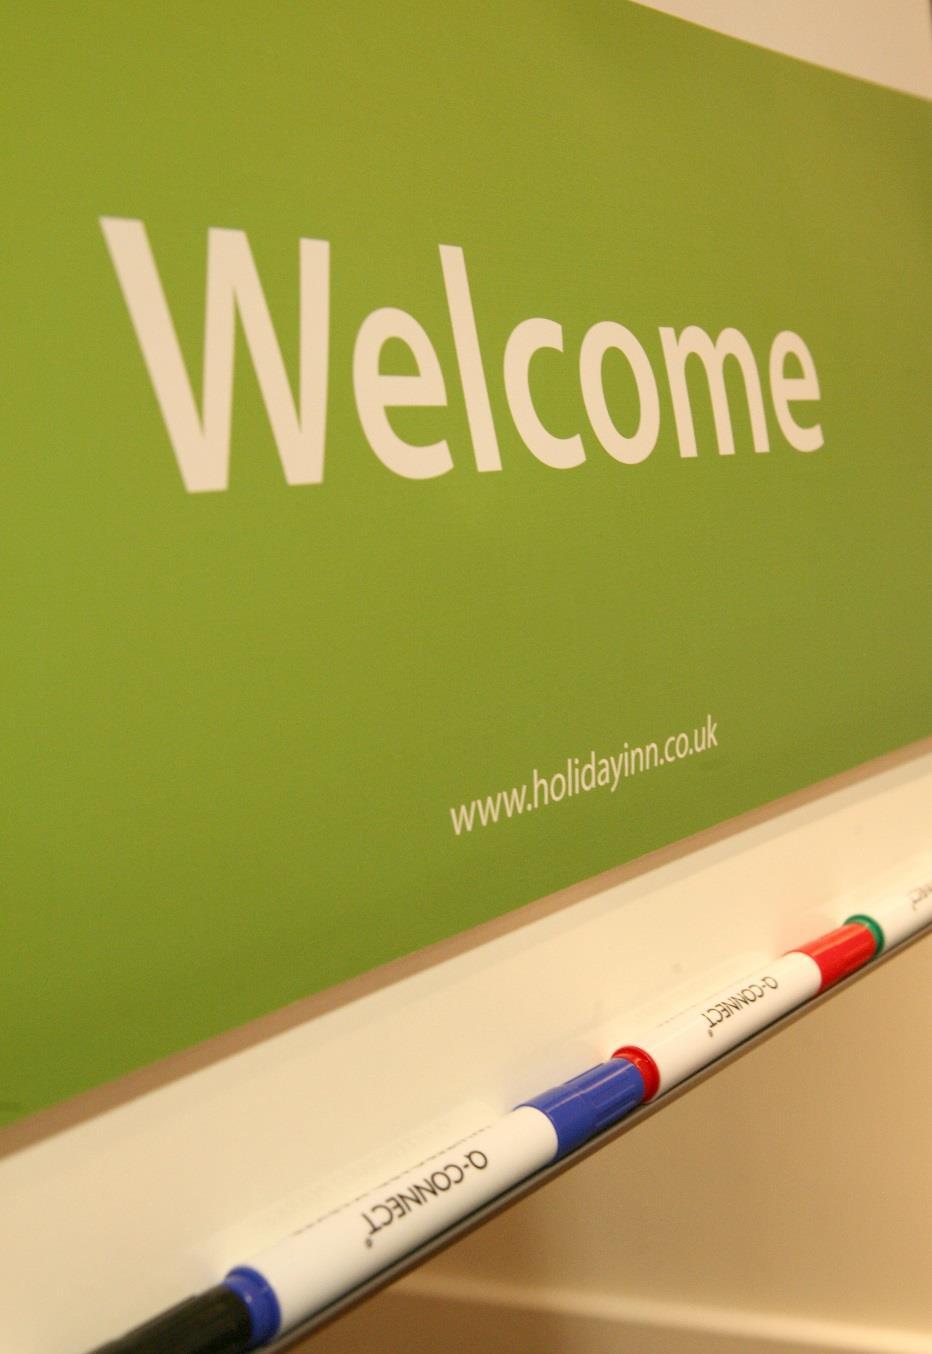 Day Delegate Packages The Holiday Inn Winchester provides a refreshing alternative to the usual hectic environment of the office.